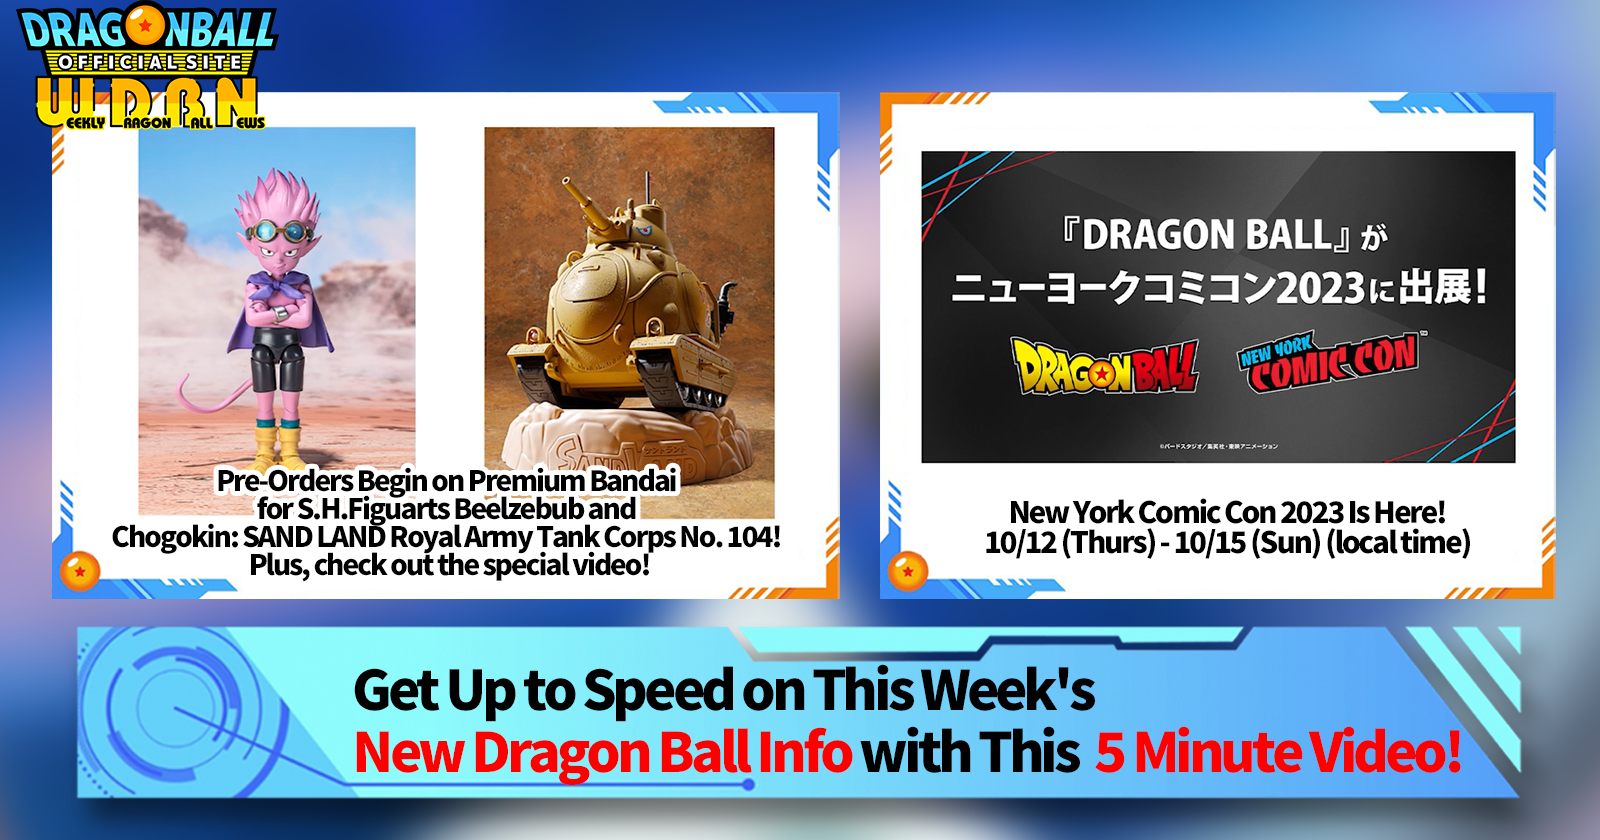 October 30th] Weekly Dragon Ball News Broadcast!]